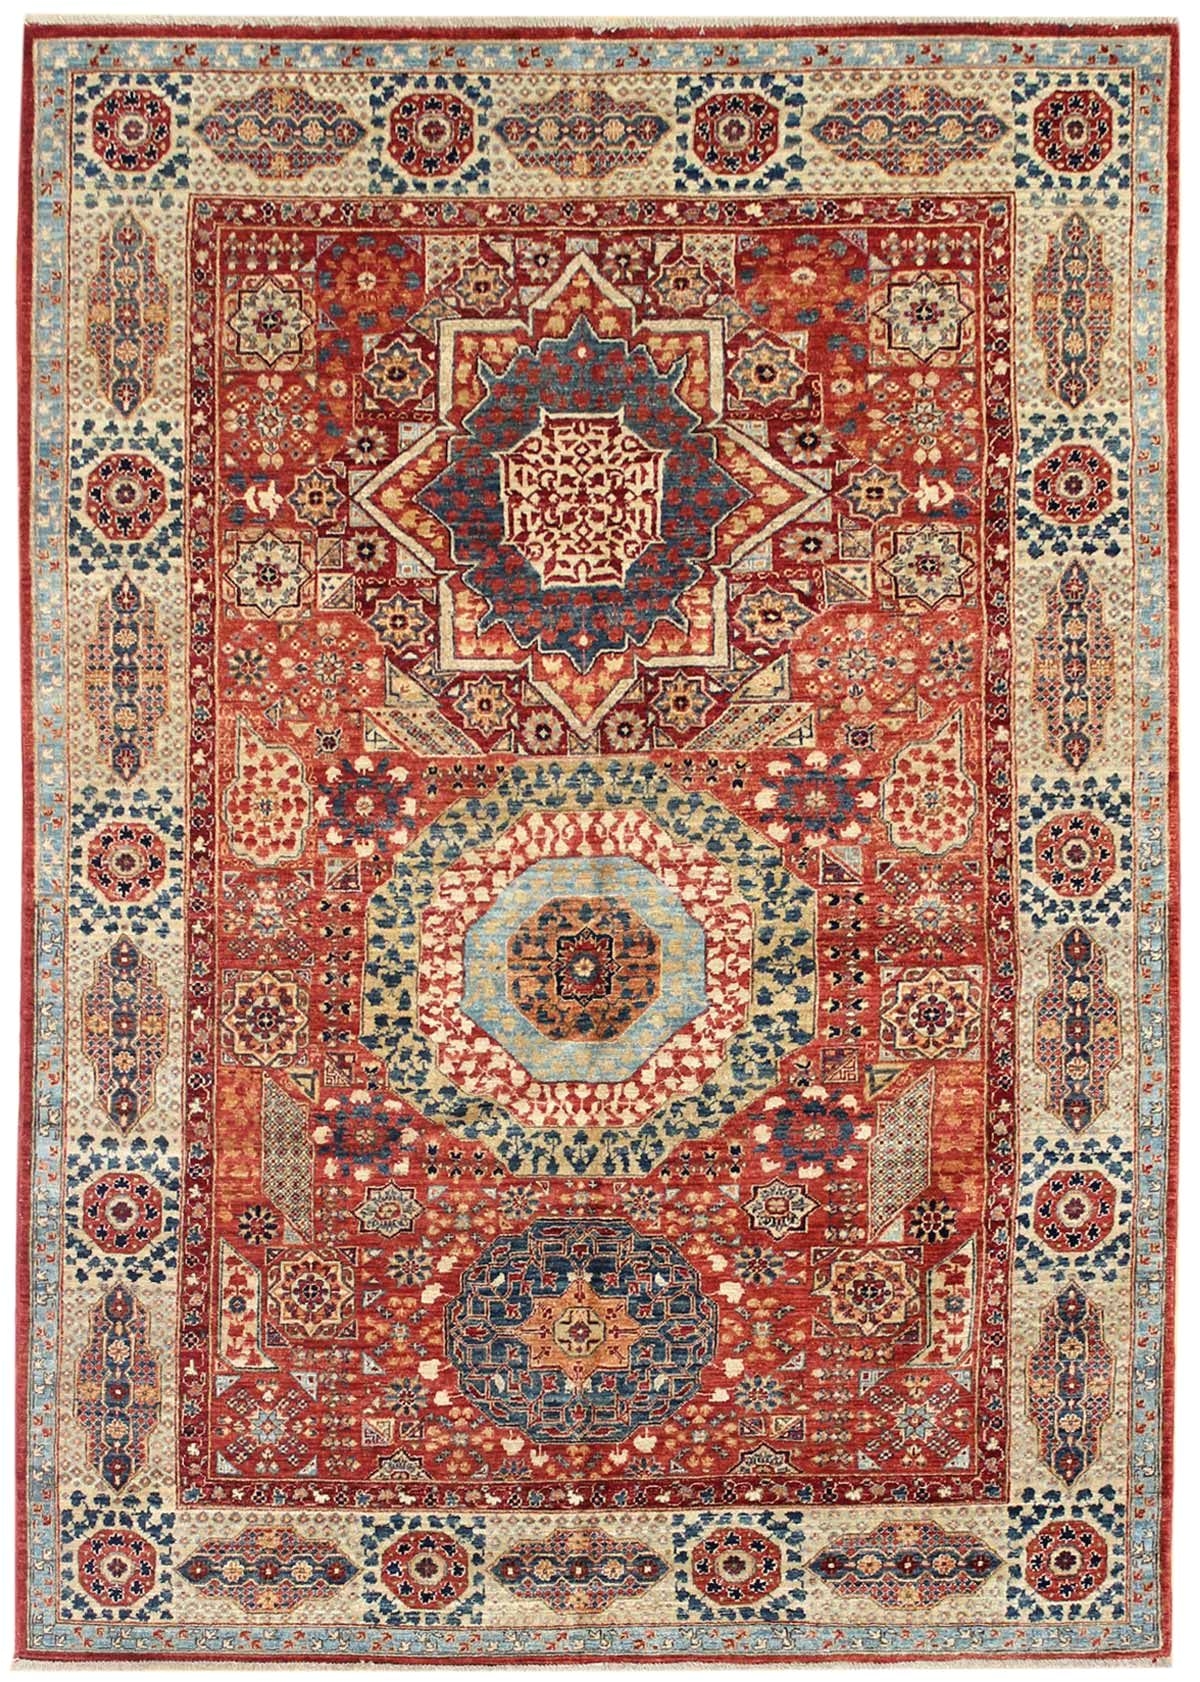 geometric oriental rugs gallery mamluk design rug hand knotted in afghanistan size